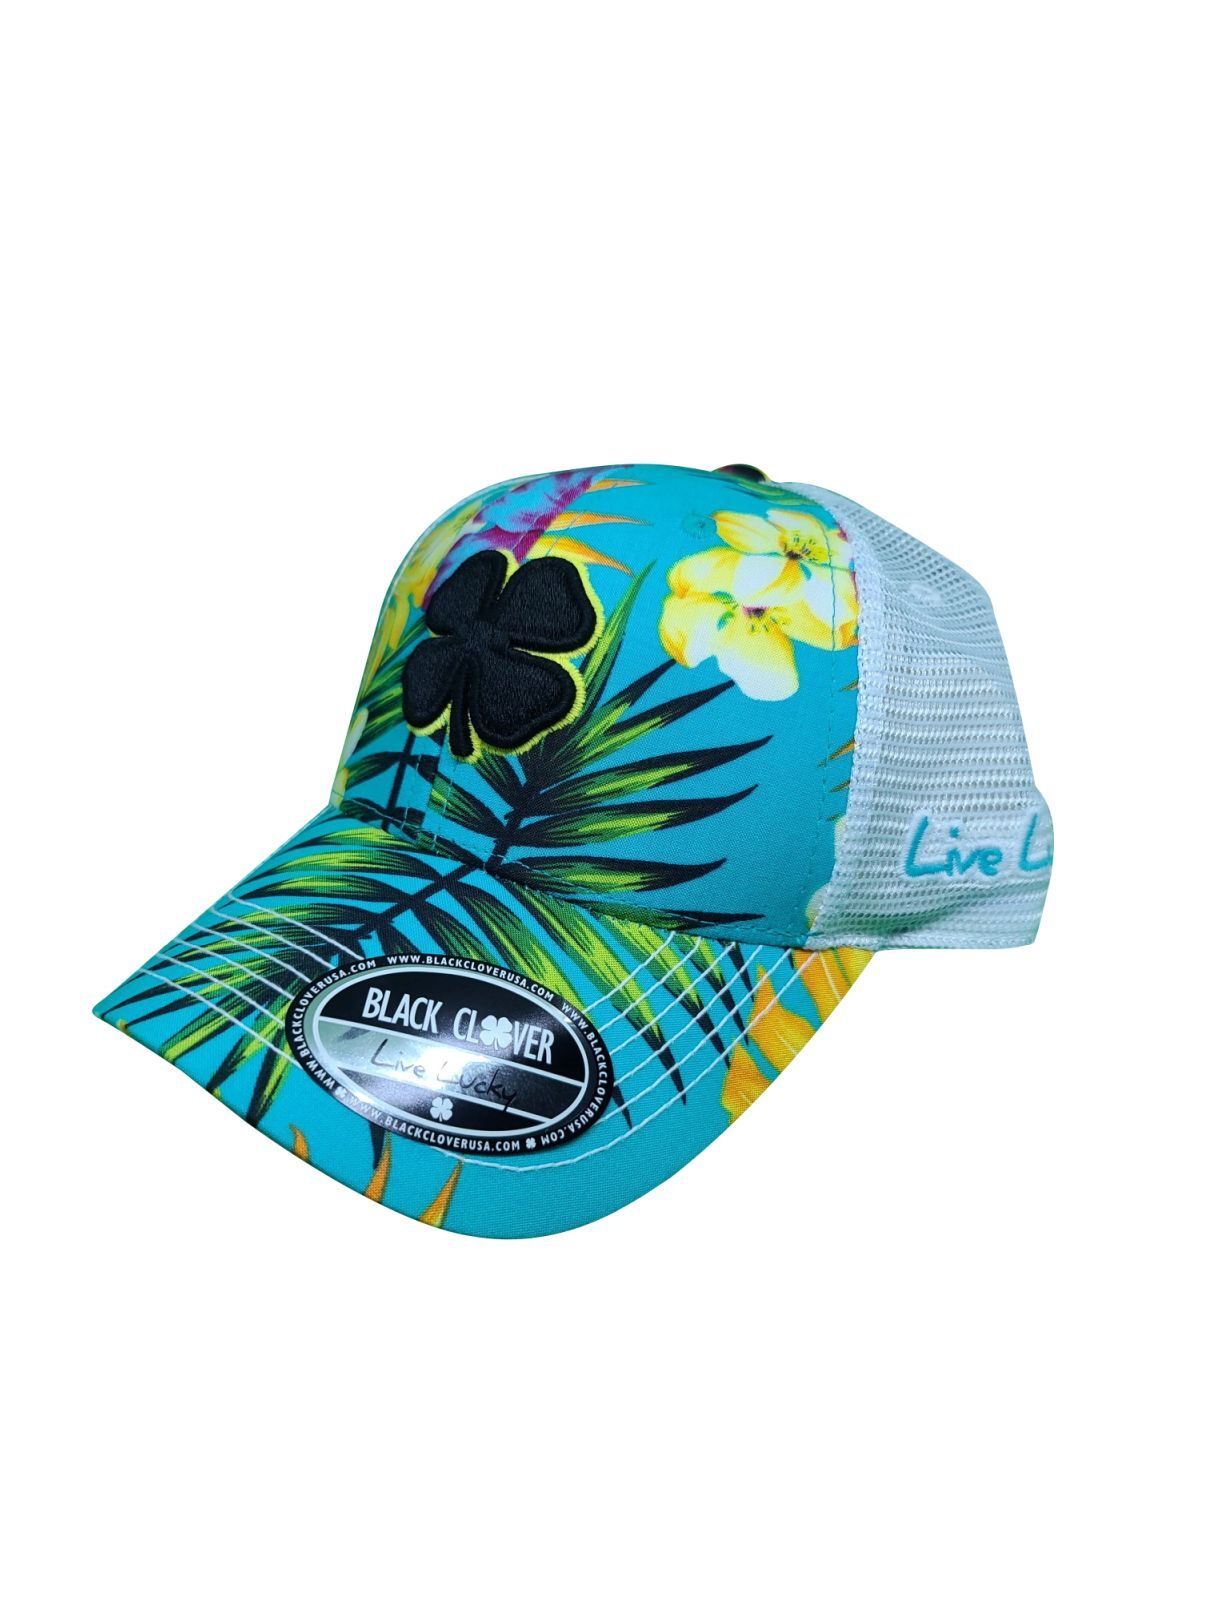 BC HAT LIVE LUCKY | Code 10 Gear